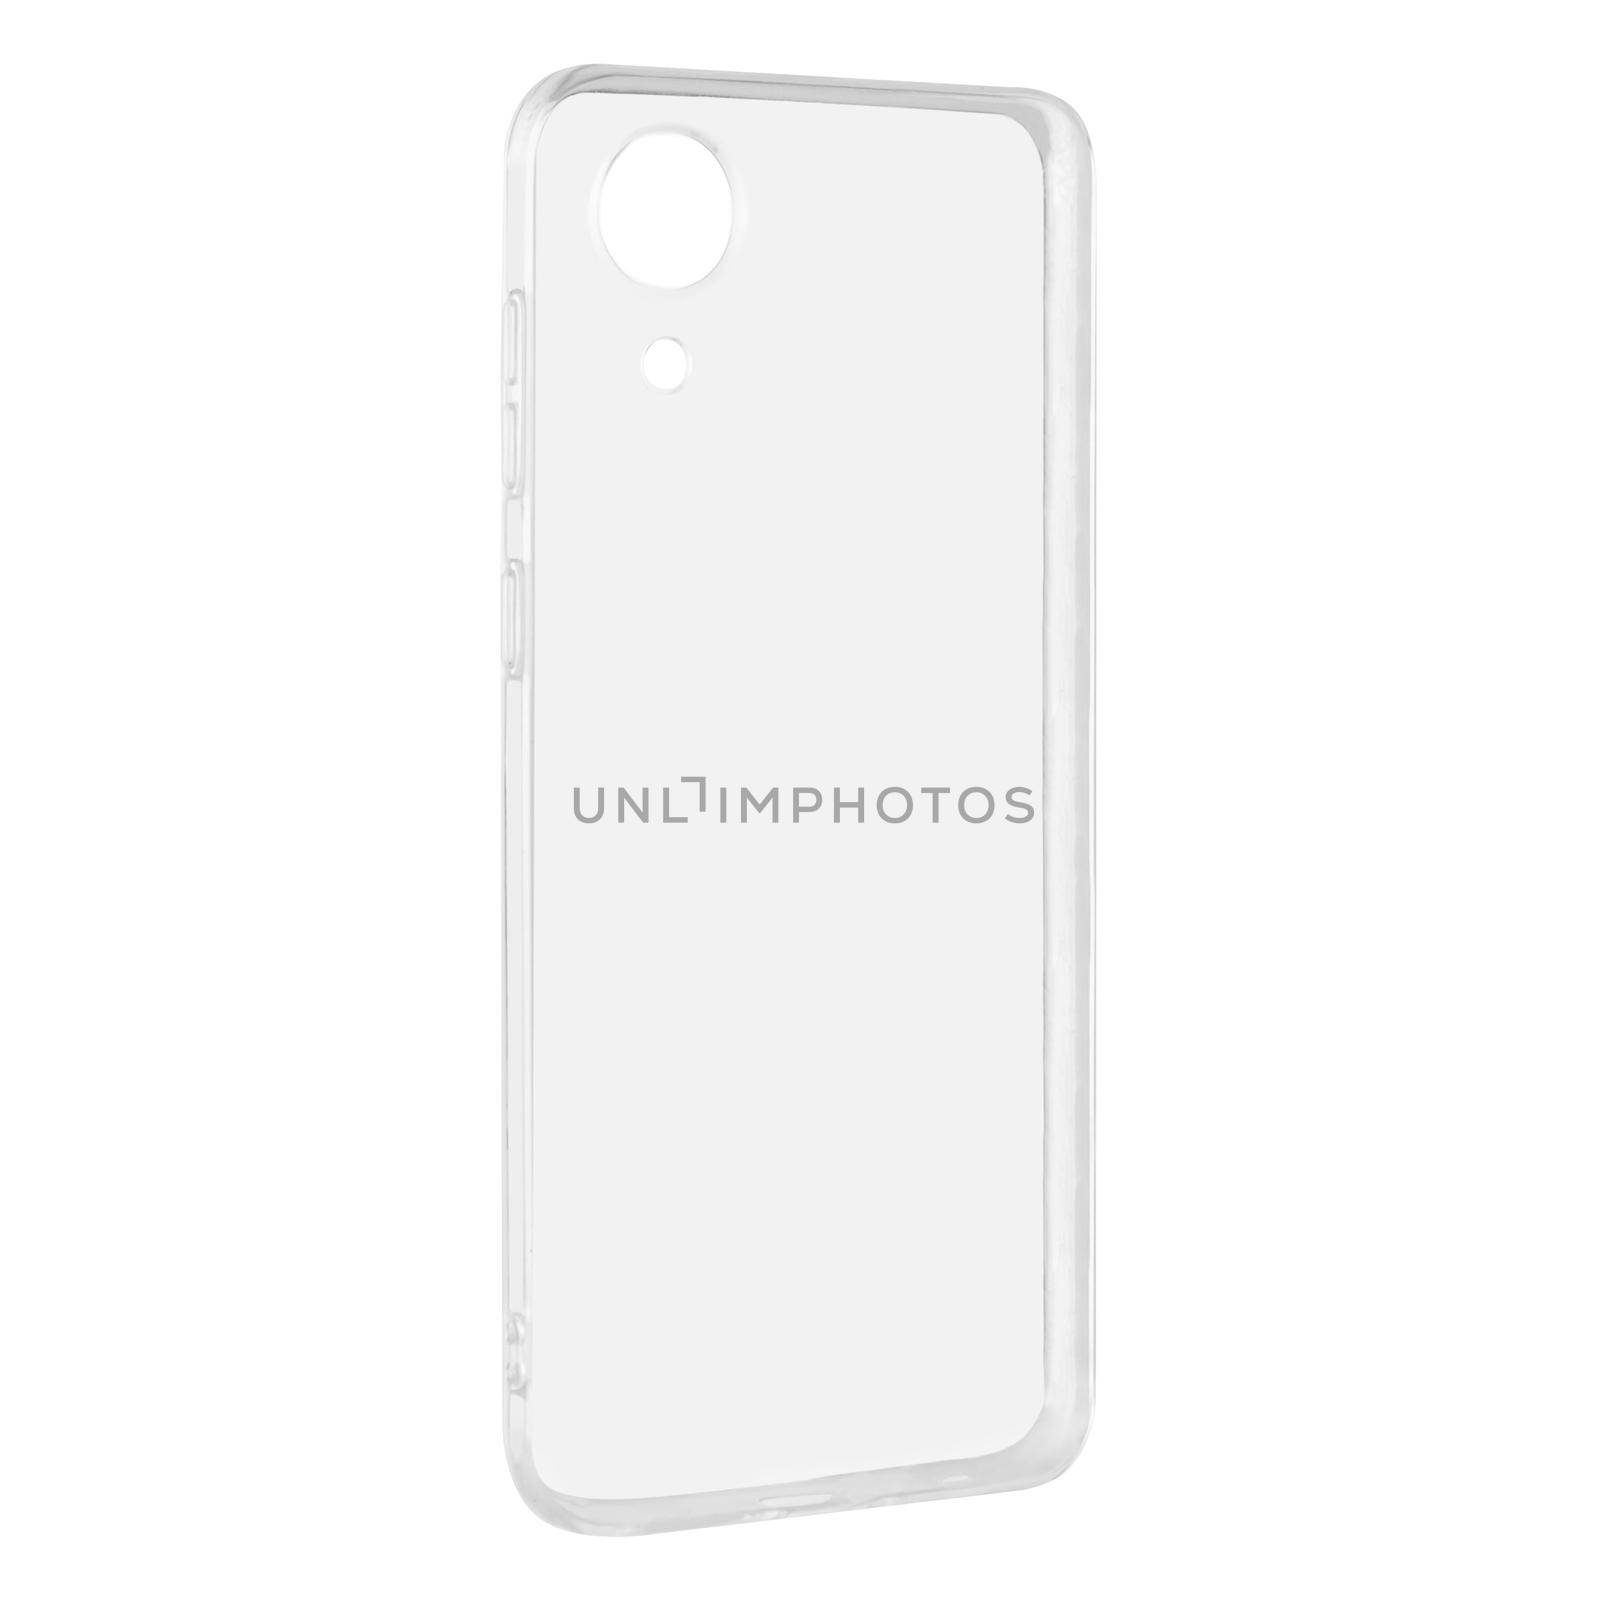 transparent silicone case, accessory for phone, isolated on white background by A_A